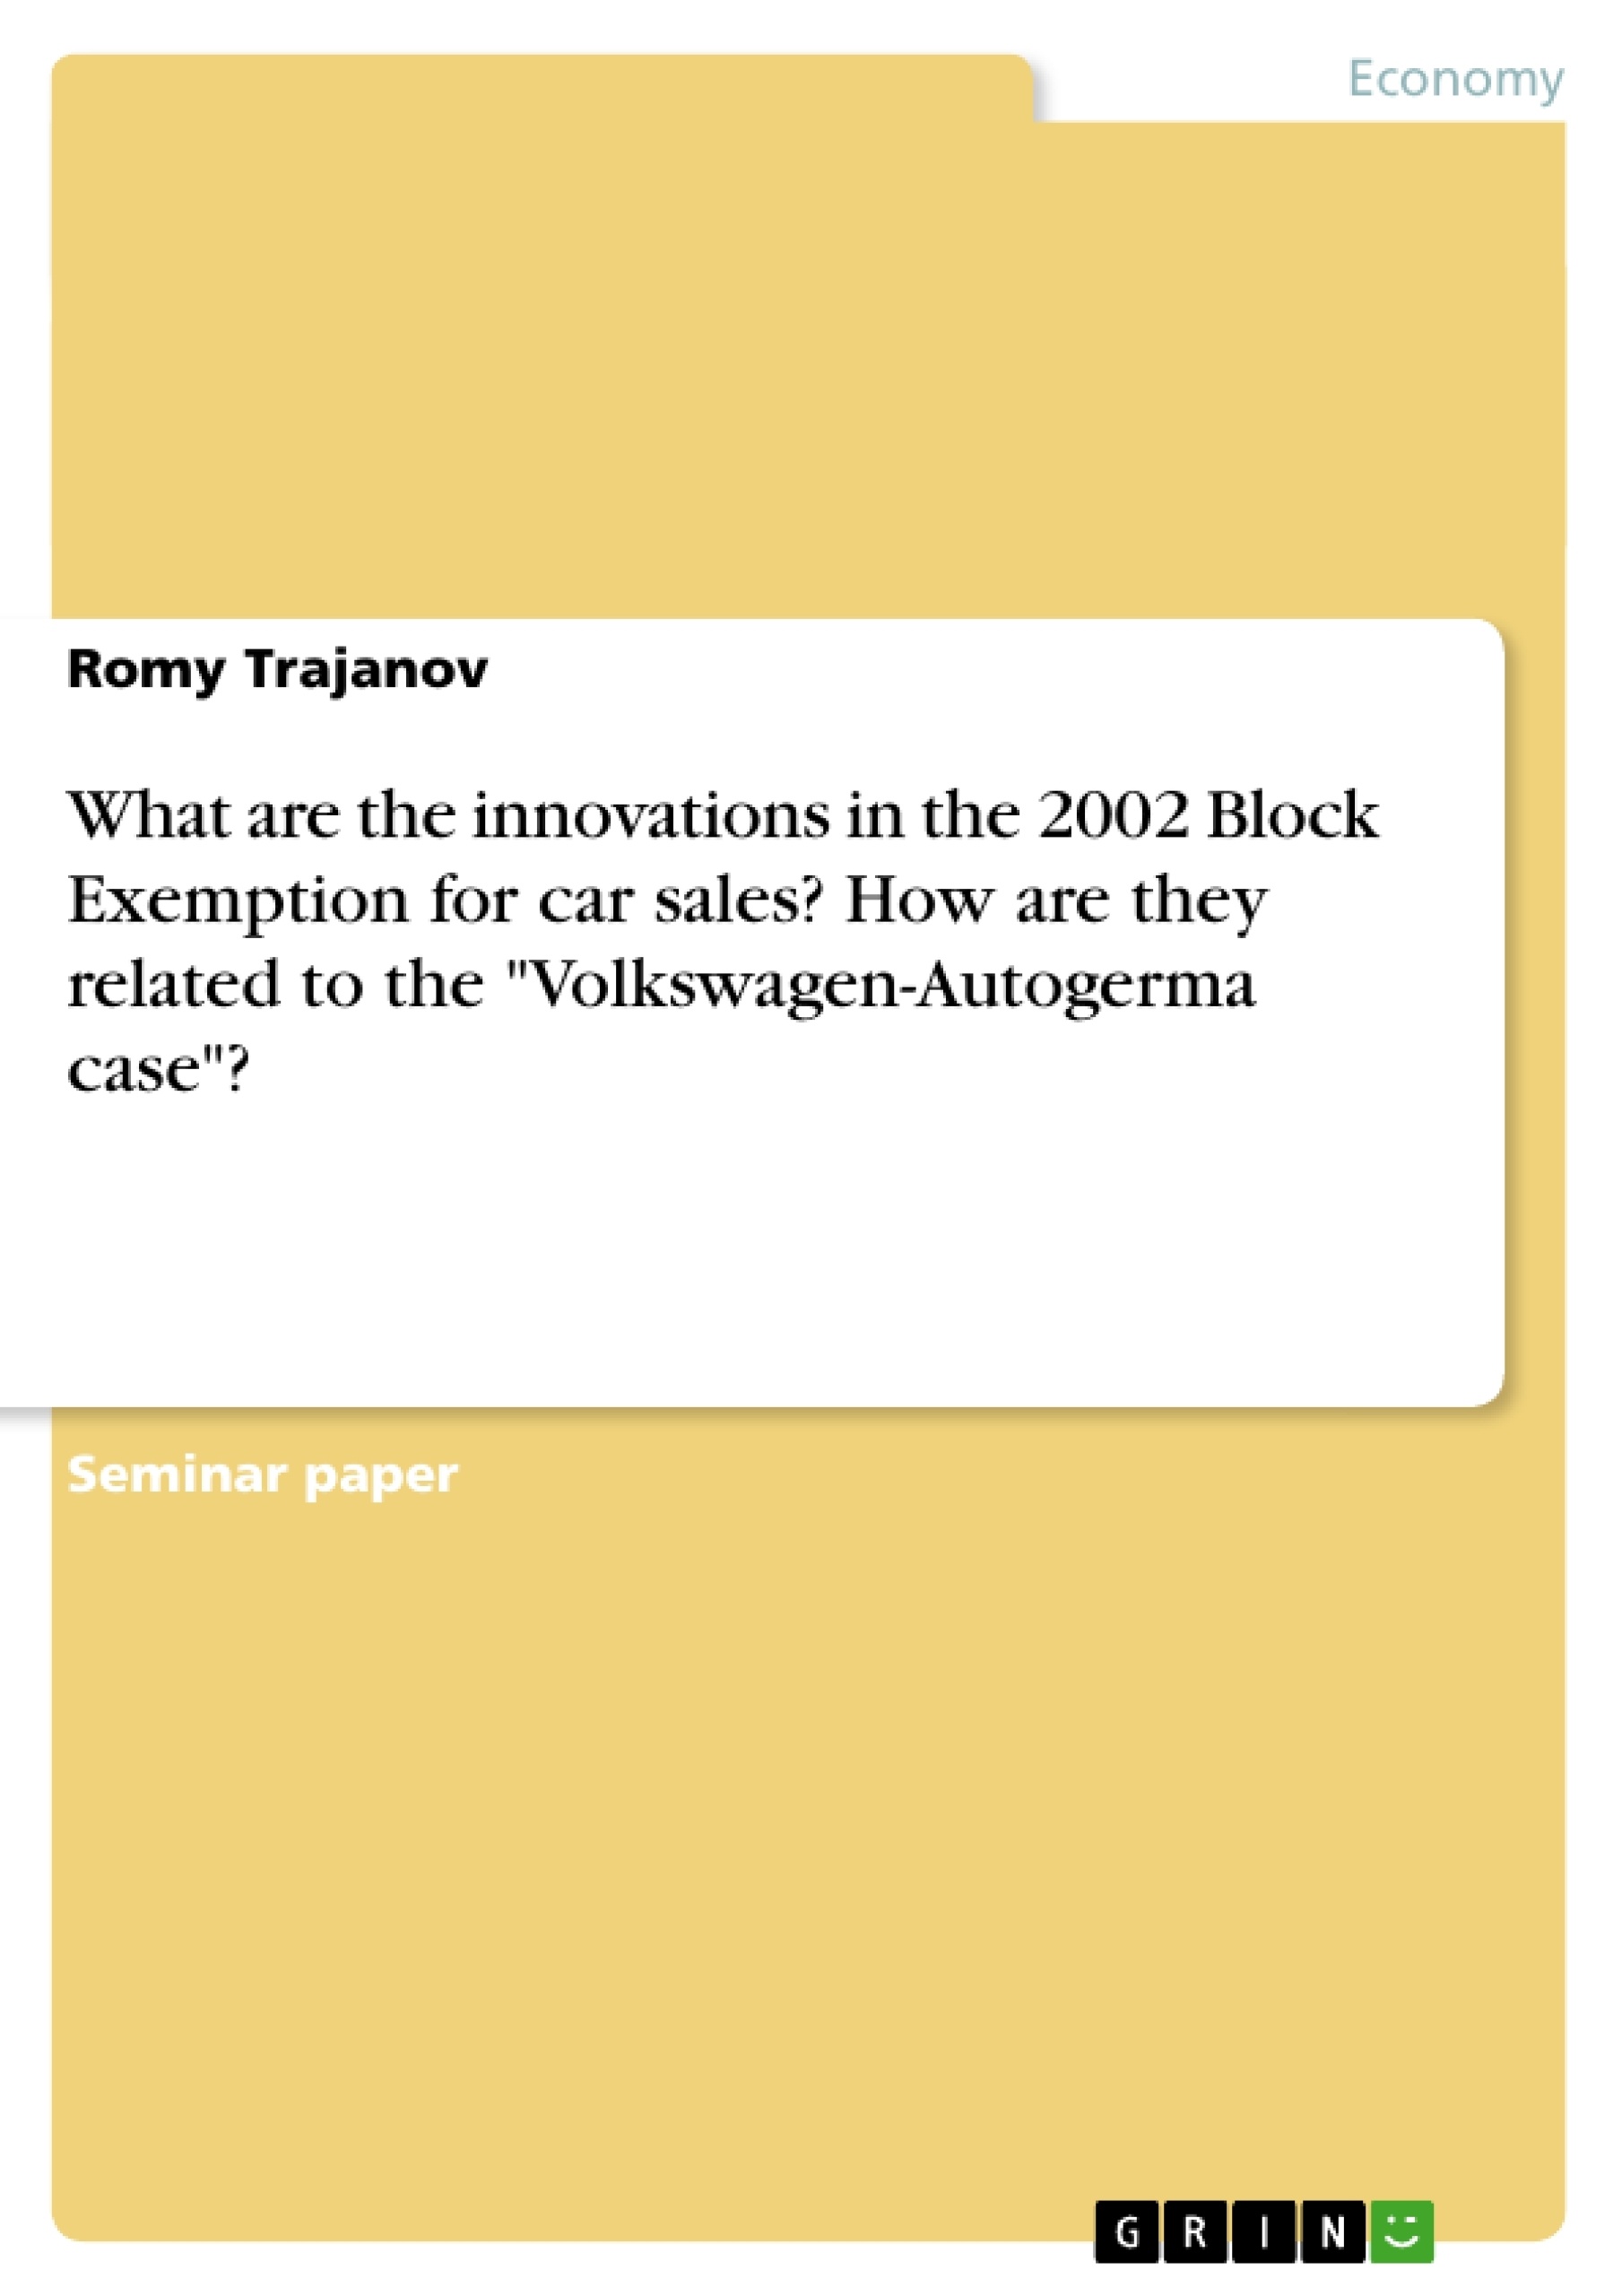 Título: What are the innovations in the 2002 Block Exemption for car sales? How are they related to the "Volkswagen-Autogerma case"?